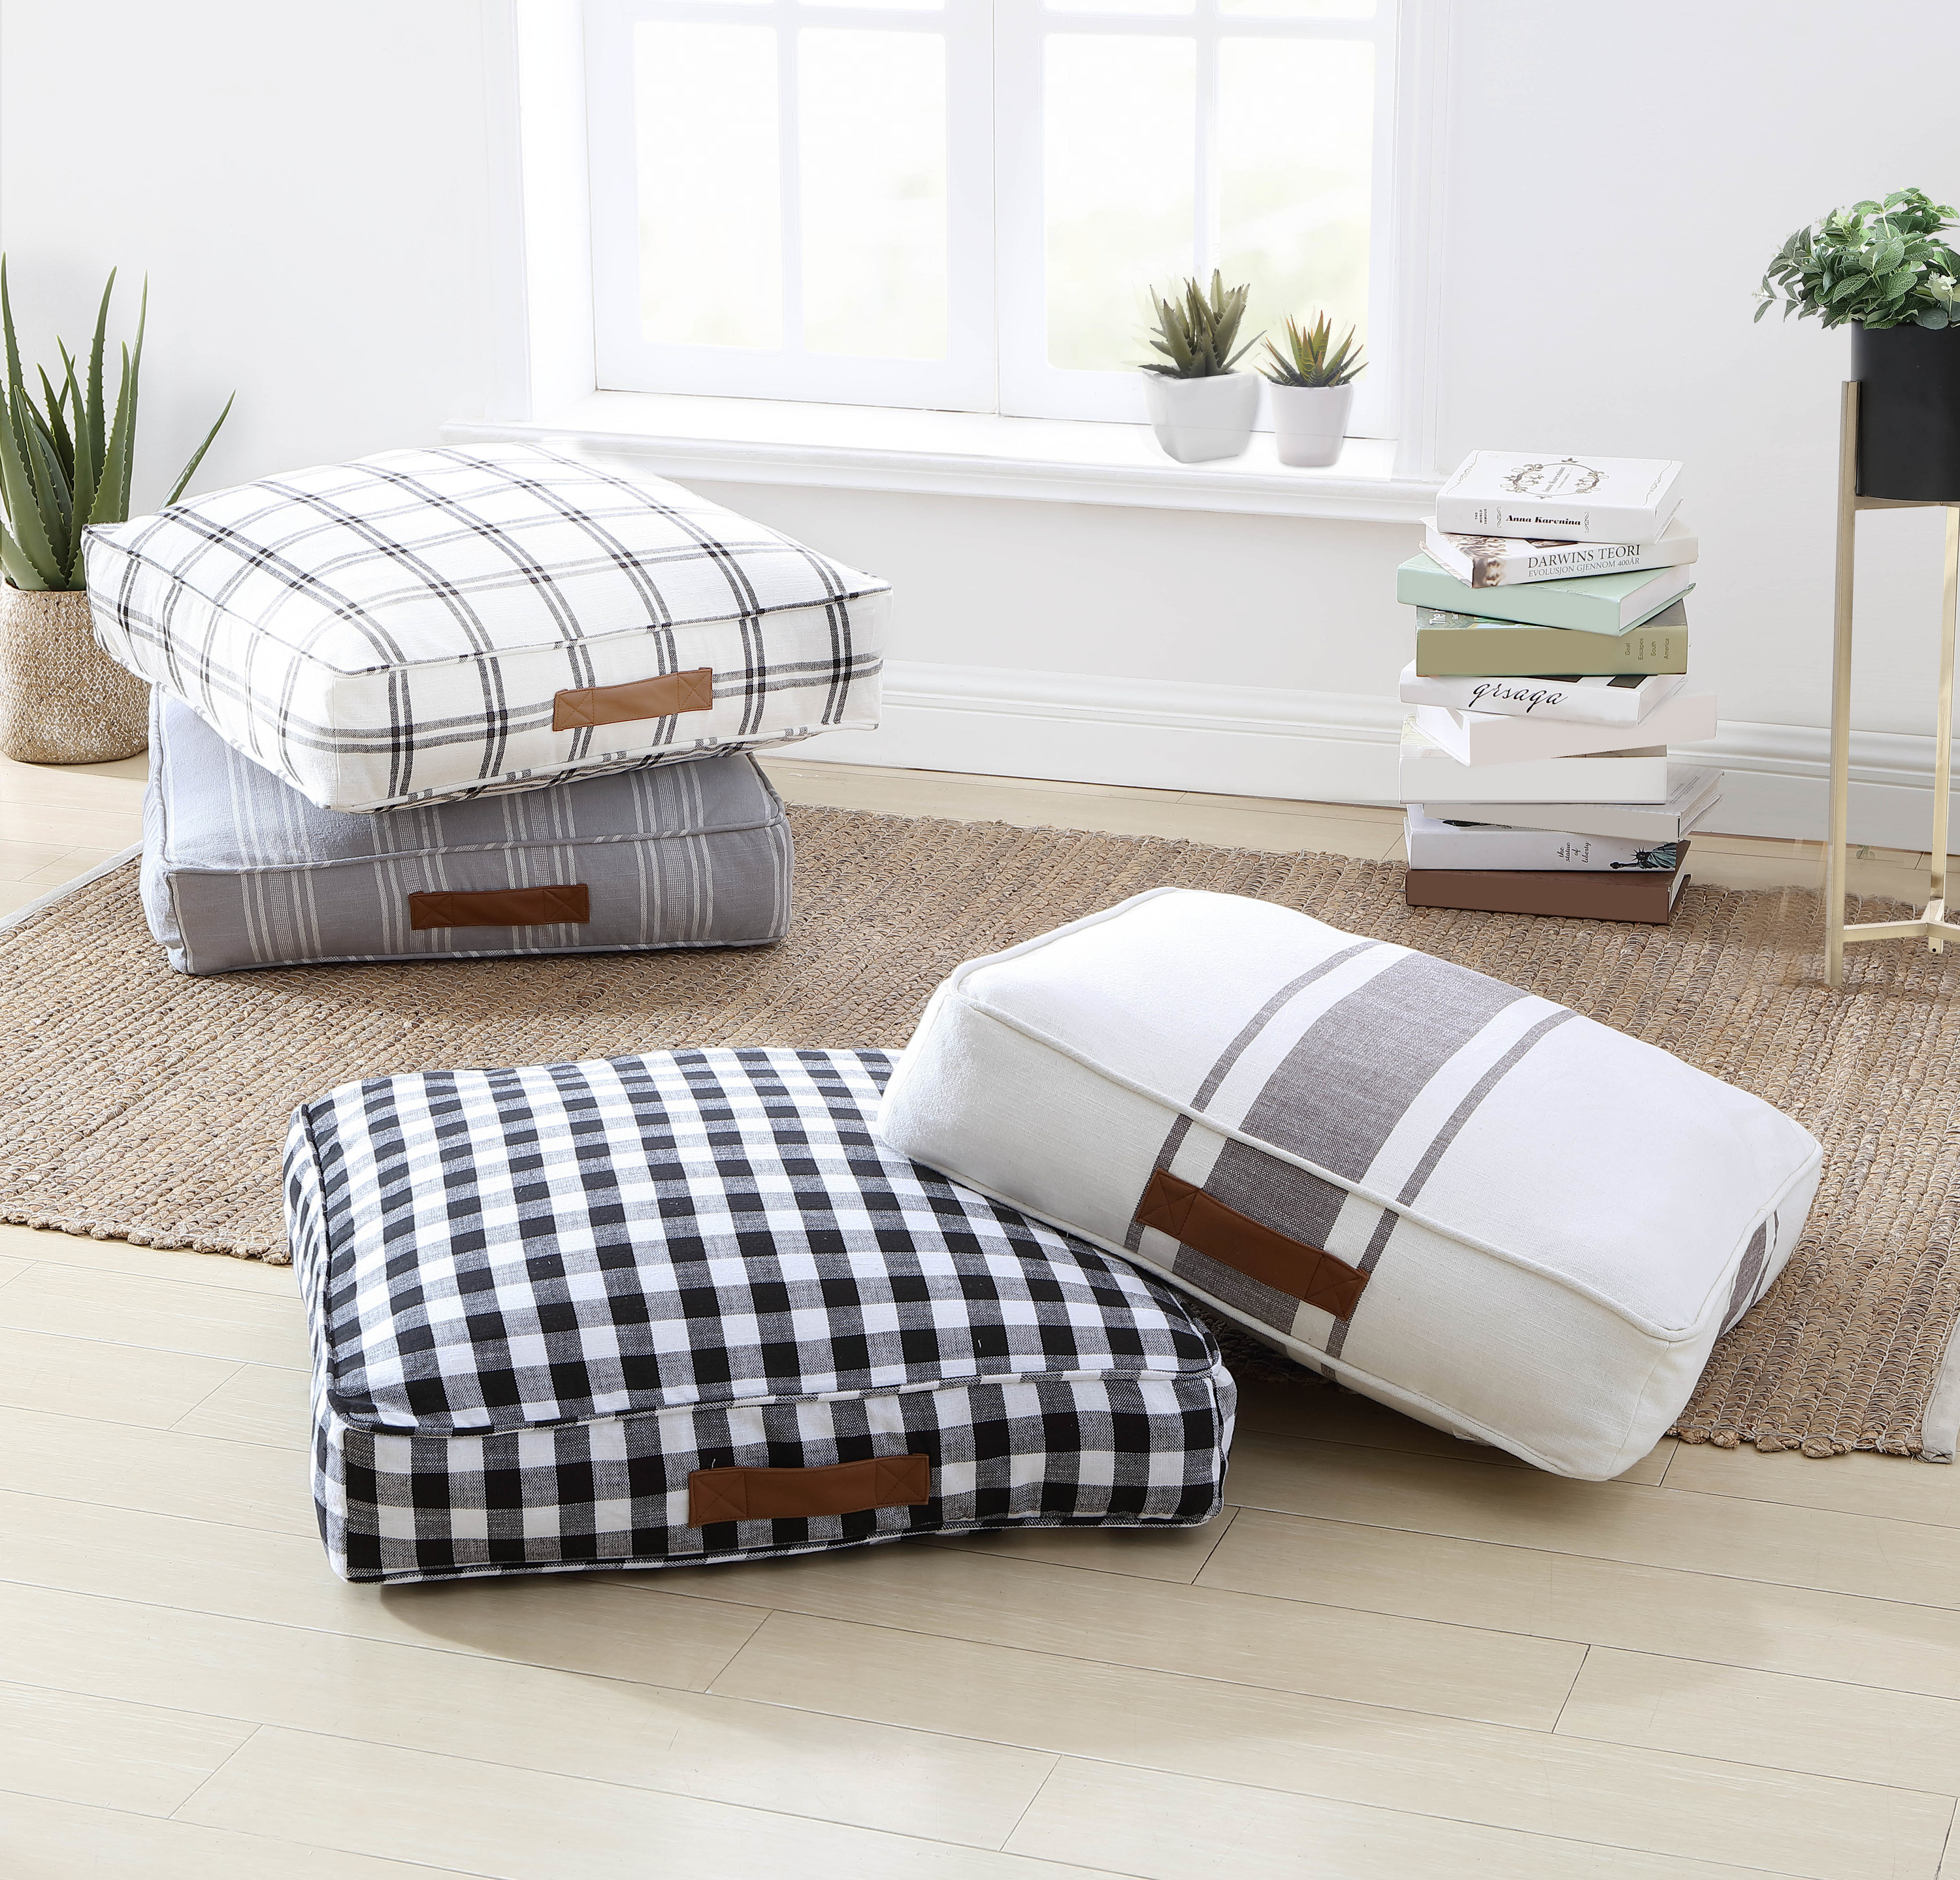 gray, black, and white floor cushions in stripe and check prints on a floor, with brown handles